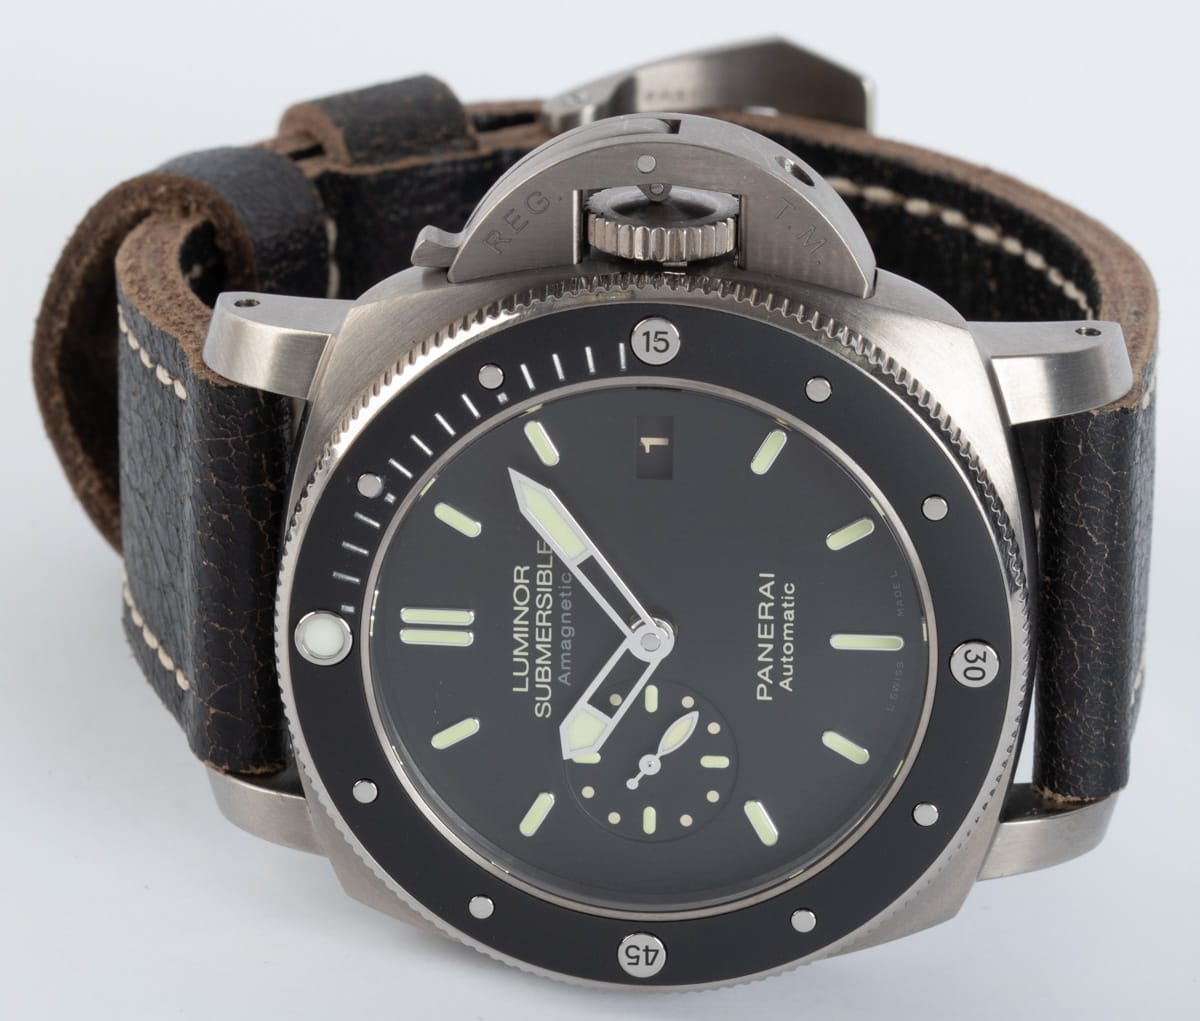 Front View of Luminor Submersible 1950 Amagnetic 3 Days Automatic Titanio